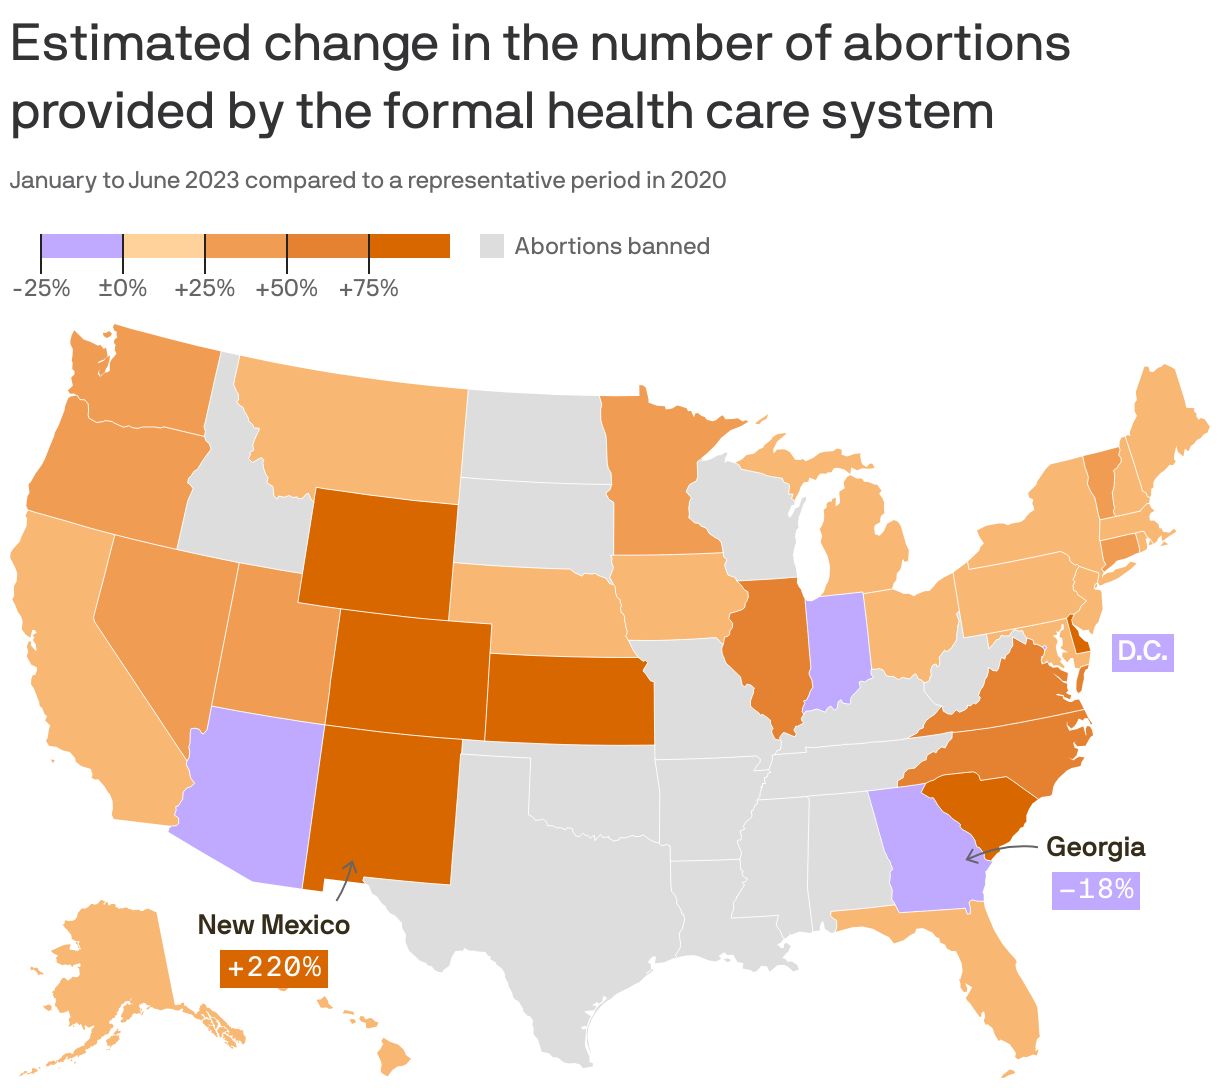 Estimated change in the number of abortions provided by the formal health care system